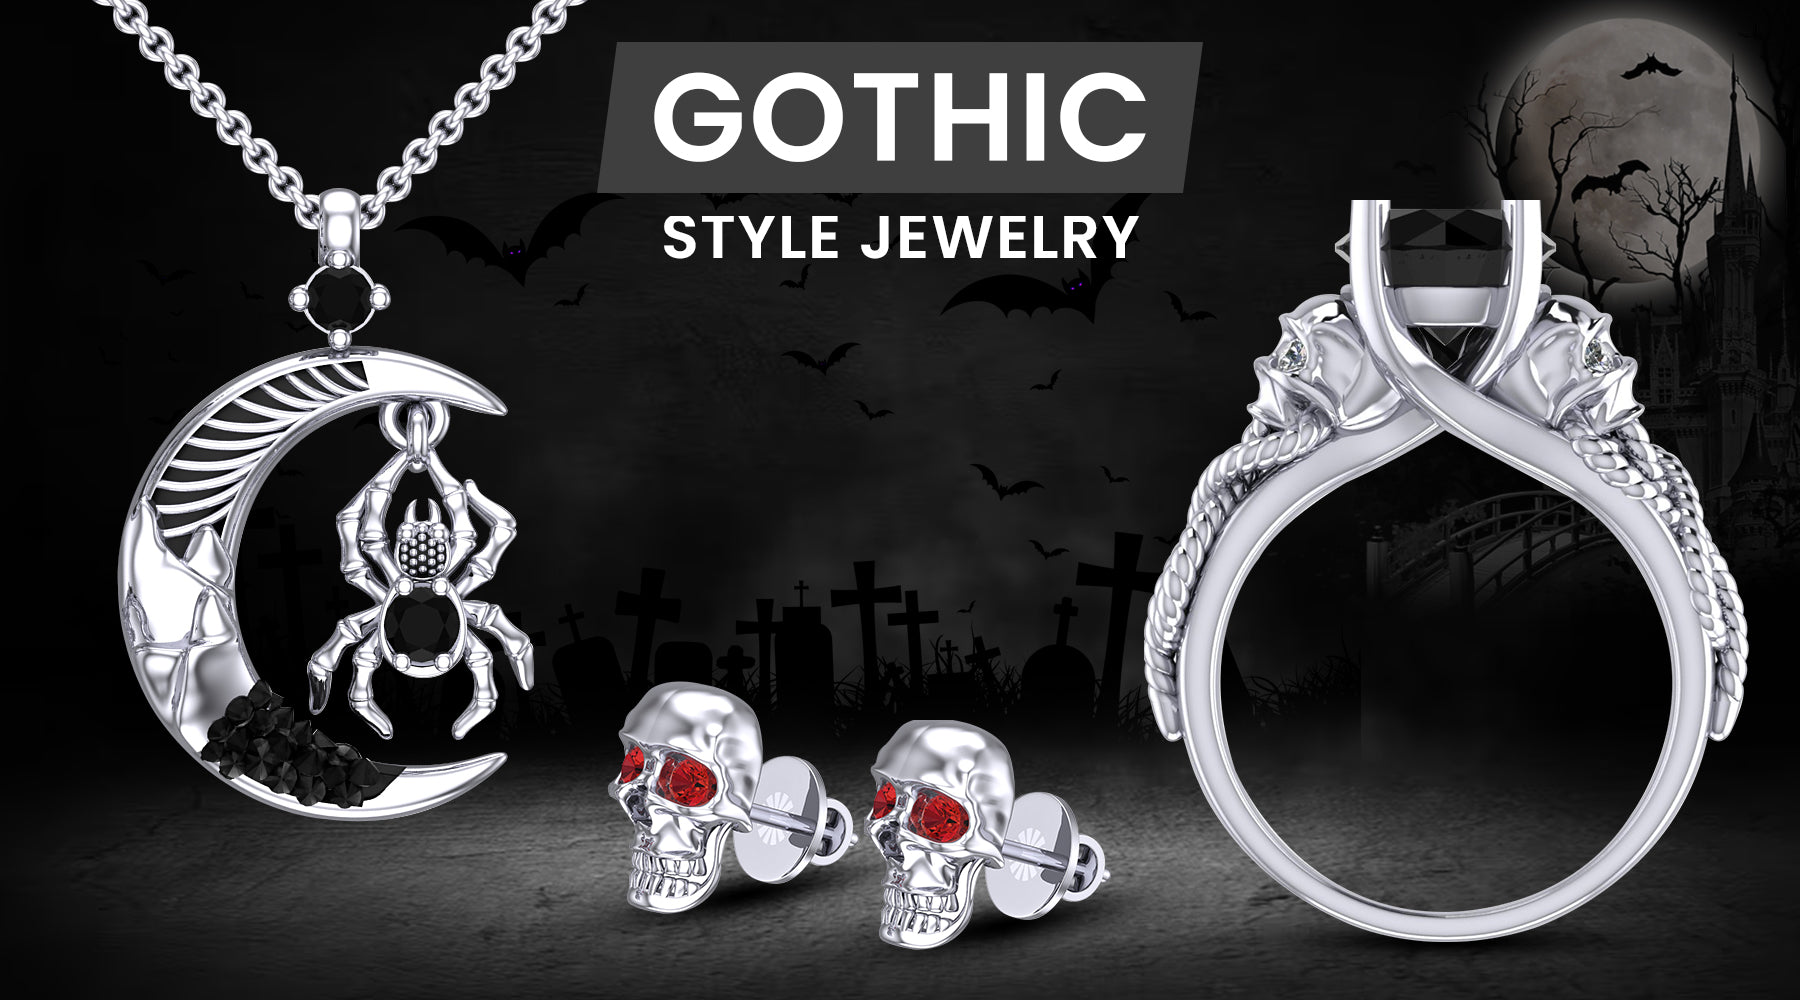 Finding Unique Gothic Style Jewelry Online